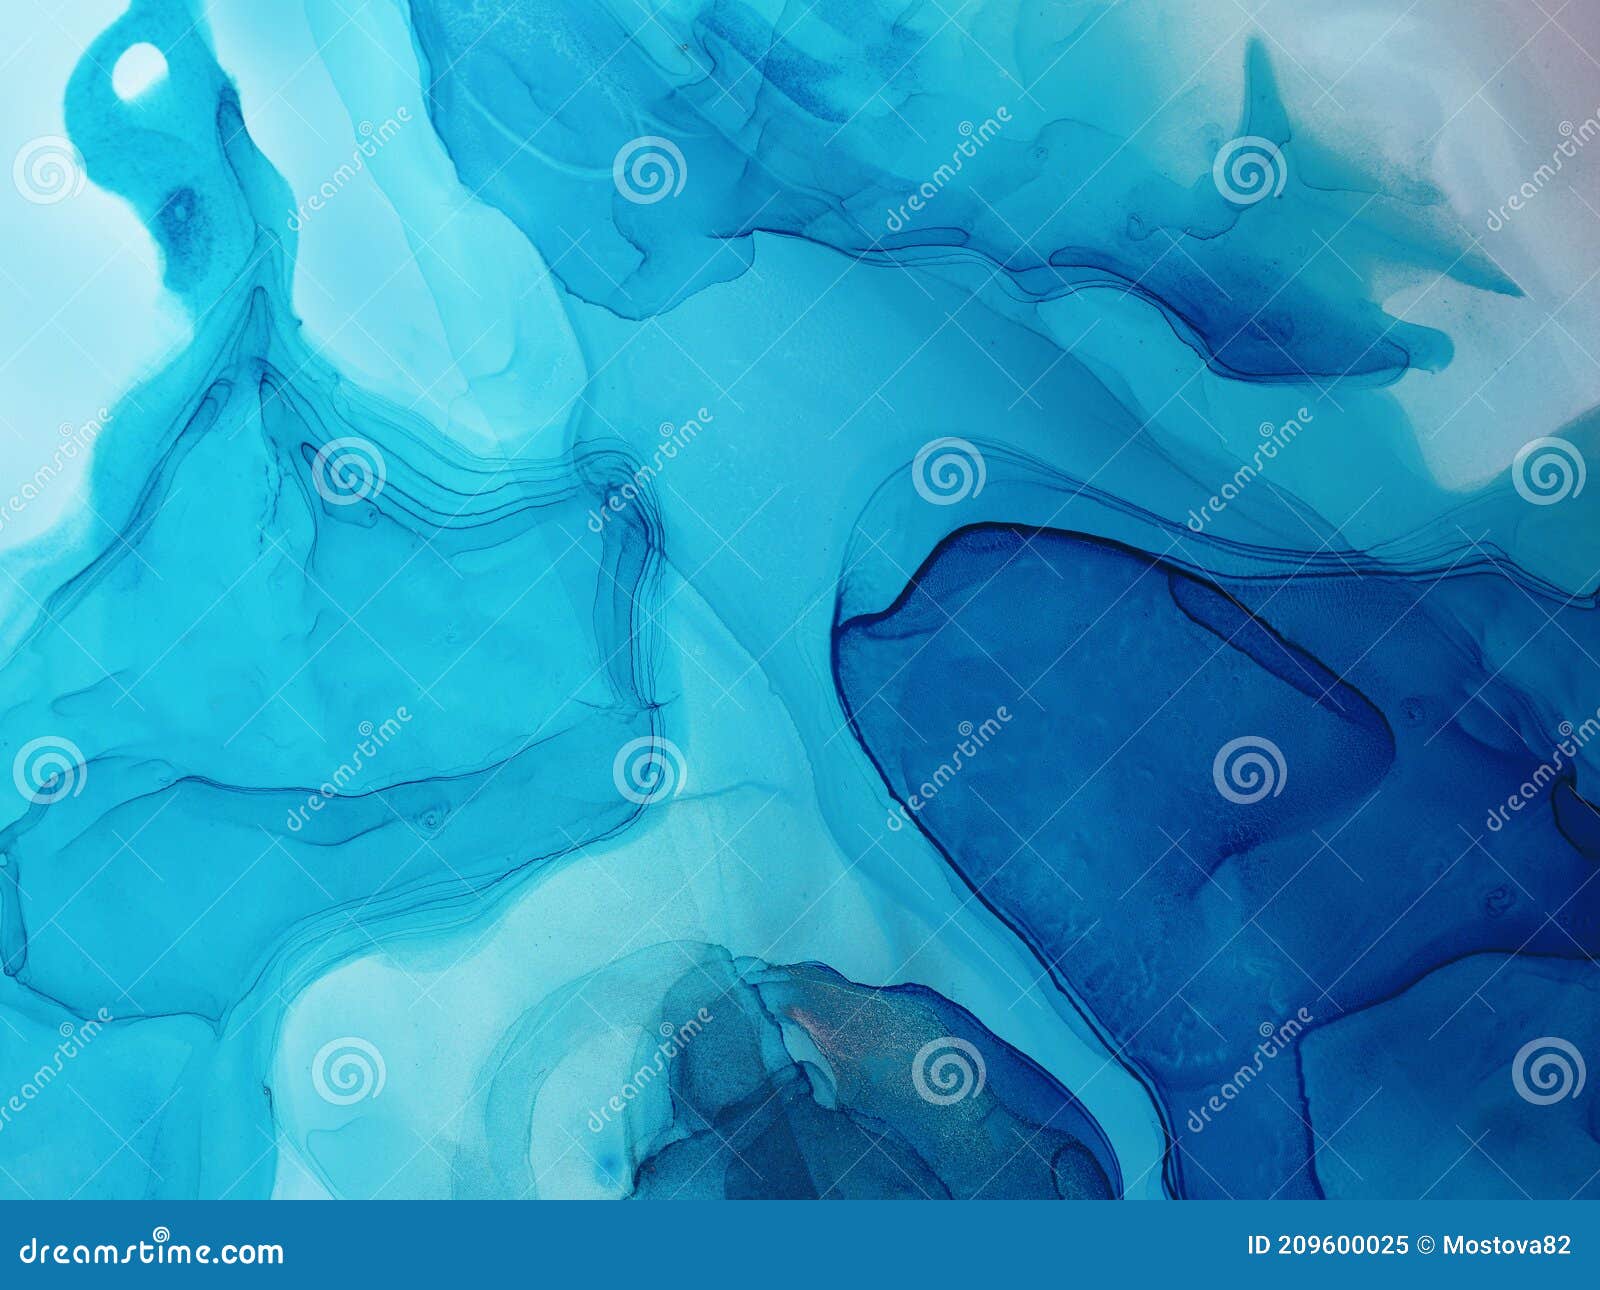 Marble Texture. Alcohol Ink Colors Translucent Stock Image - Image of ...